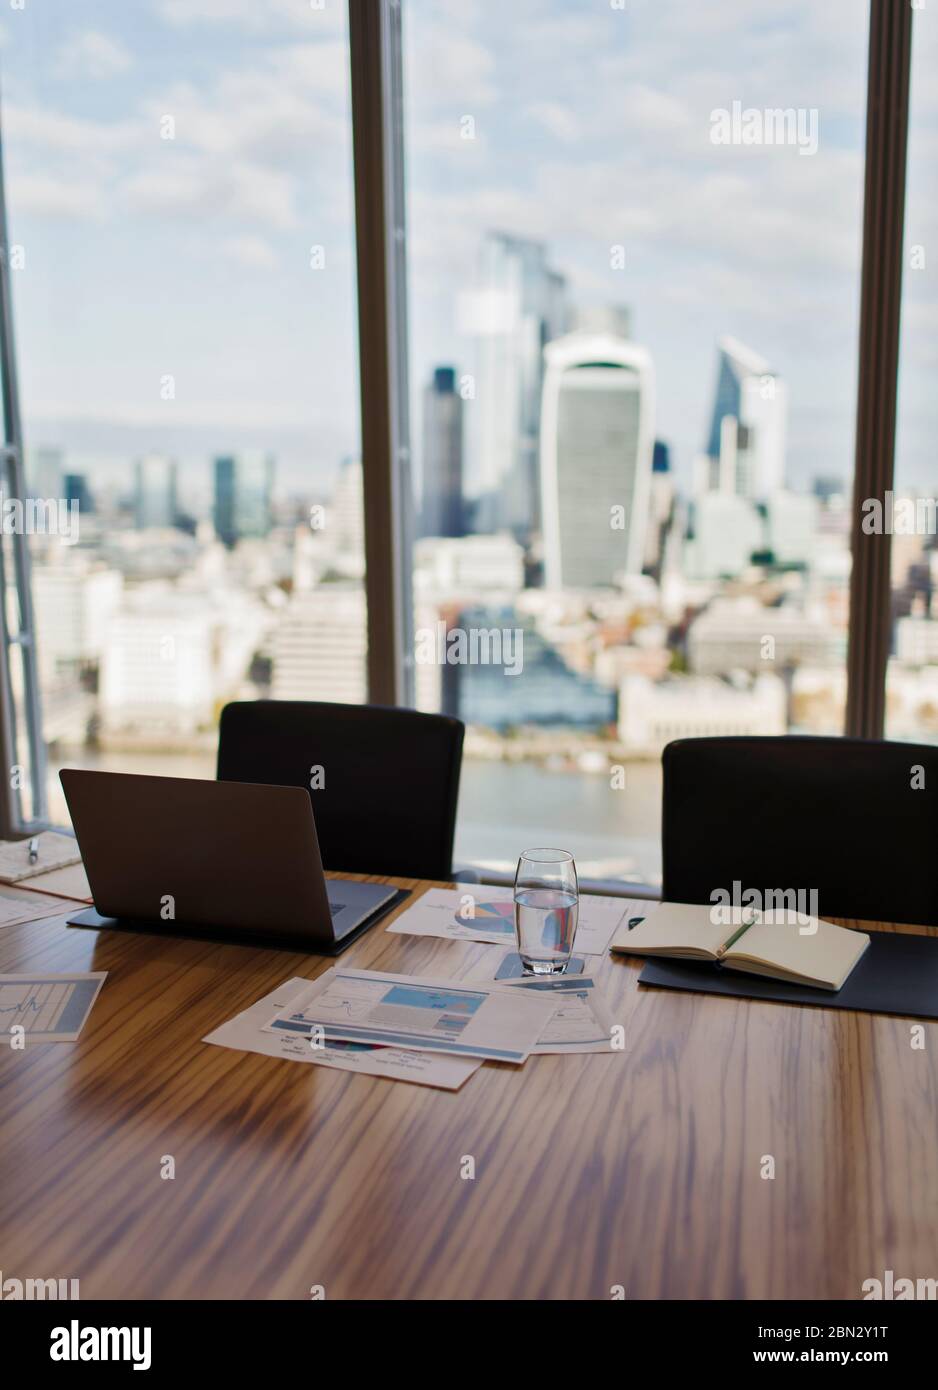 Laptop and paperwork on conference room table with city view Stock Photo